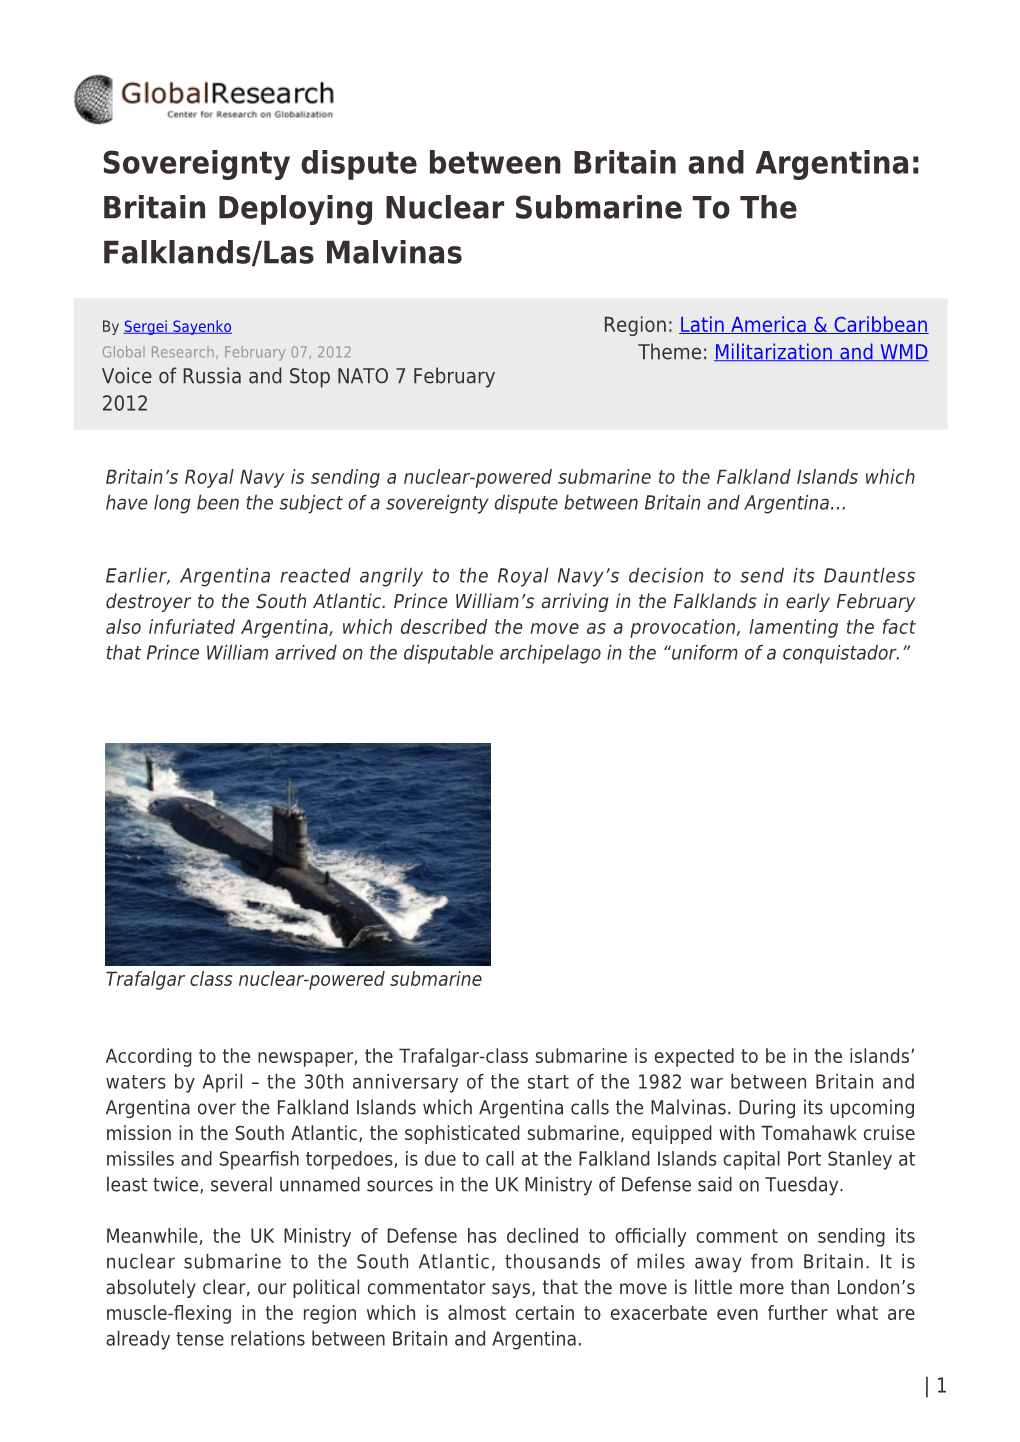 Sovereignty Dispute Between Britain and Argentina: Britain Deploying Nuclear Submarine to the Falklands/Las Malvinas